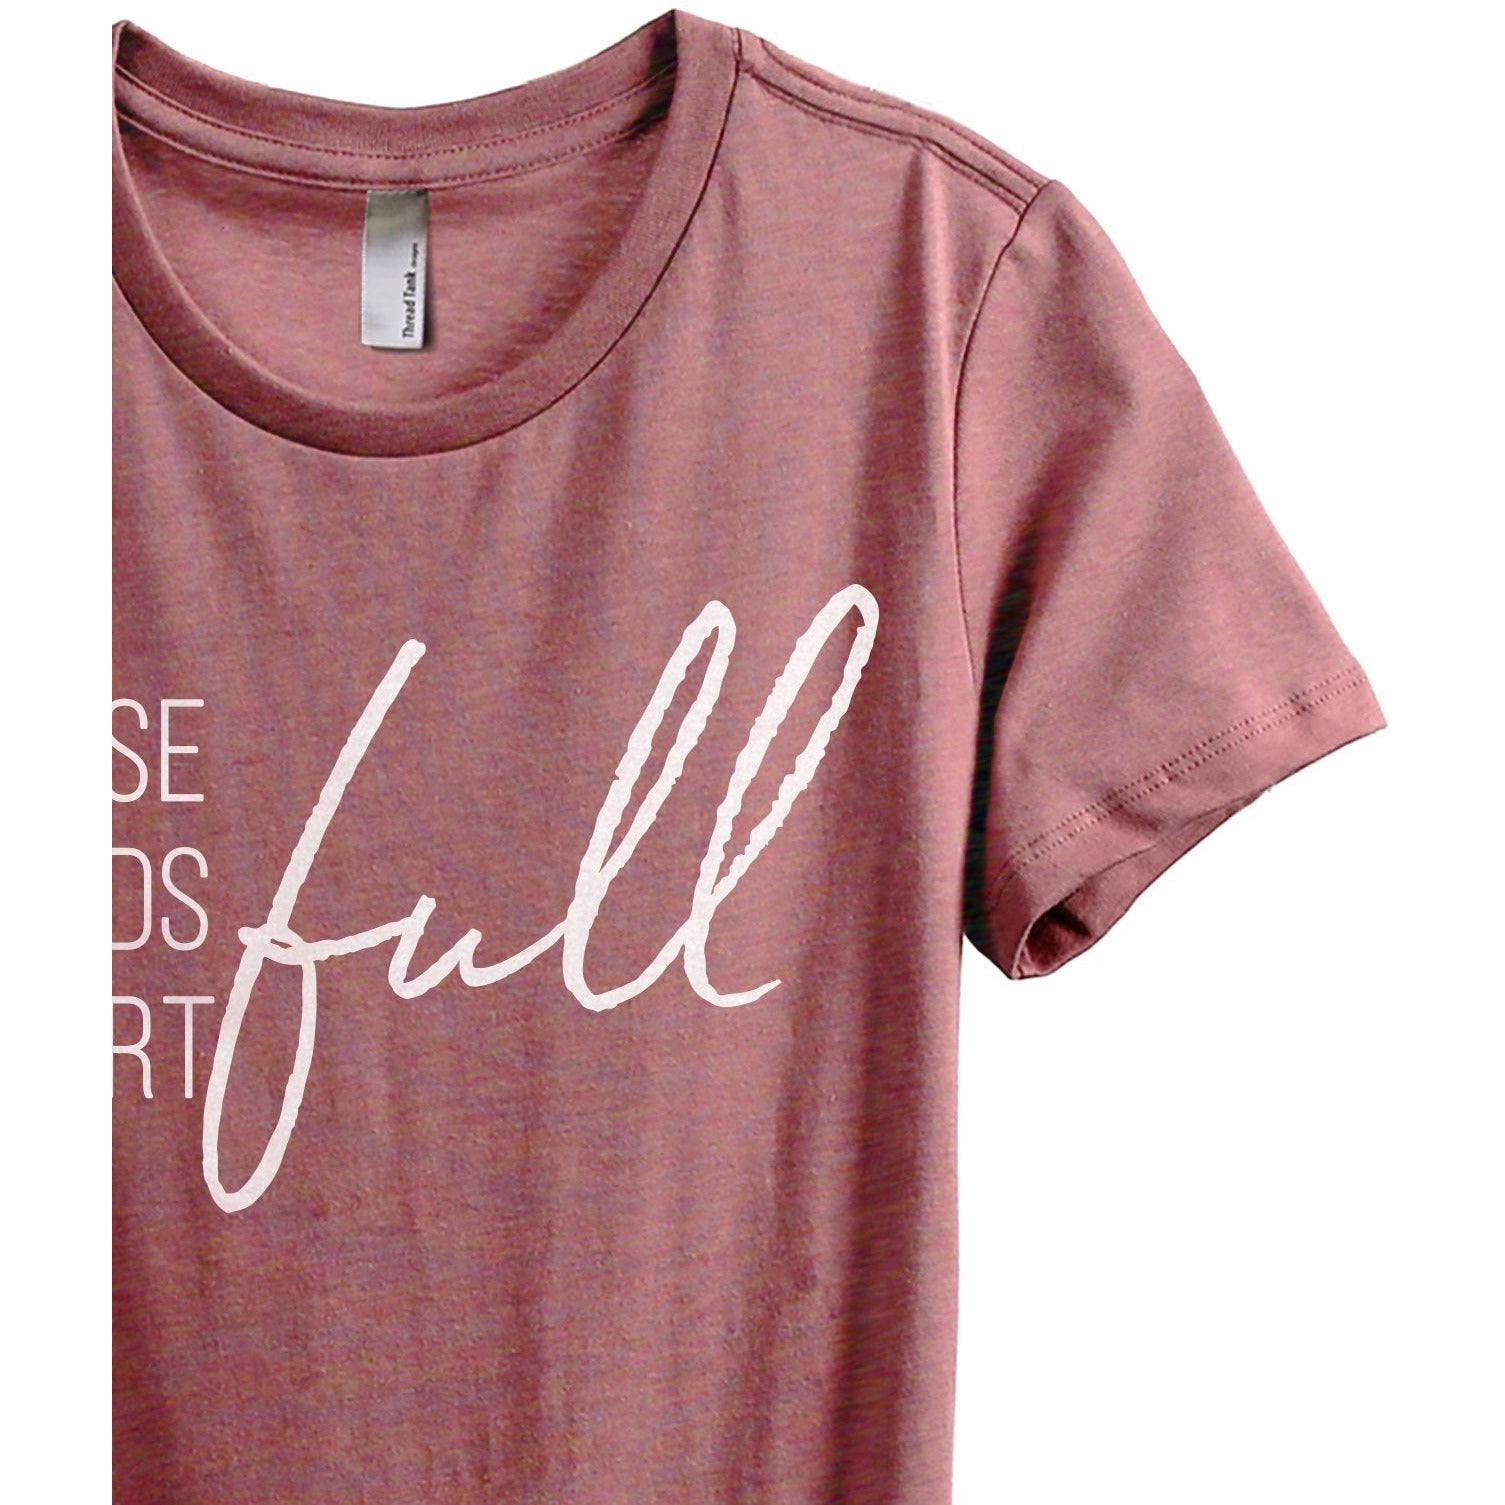 House Full Hands Full Heart Full Women's Relaxed Crewneck T-Shirt Top Tee Heather Rouge Zoom Details
